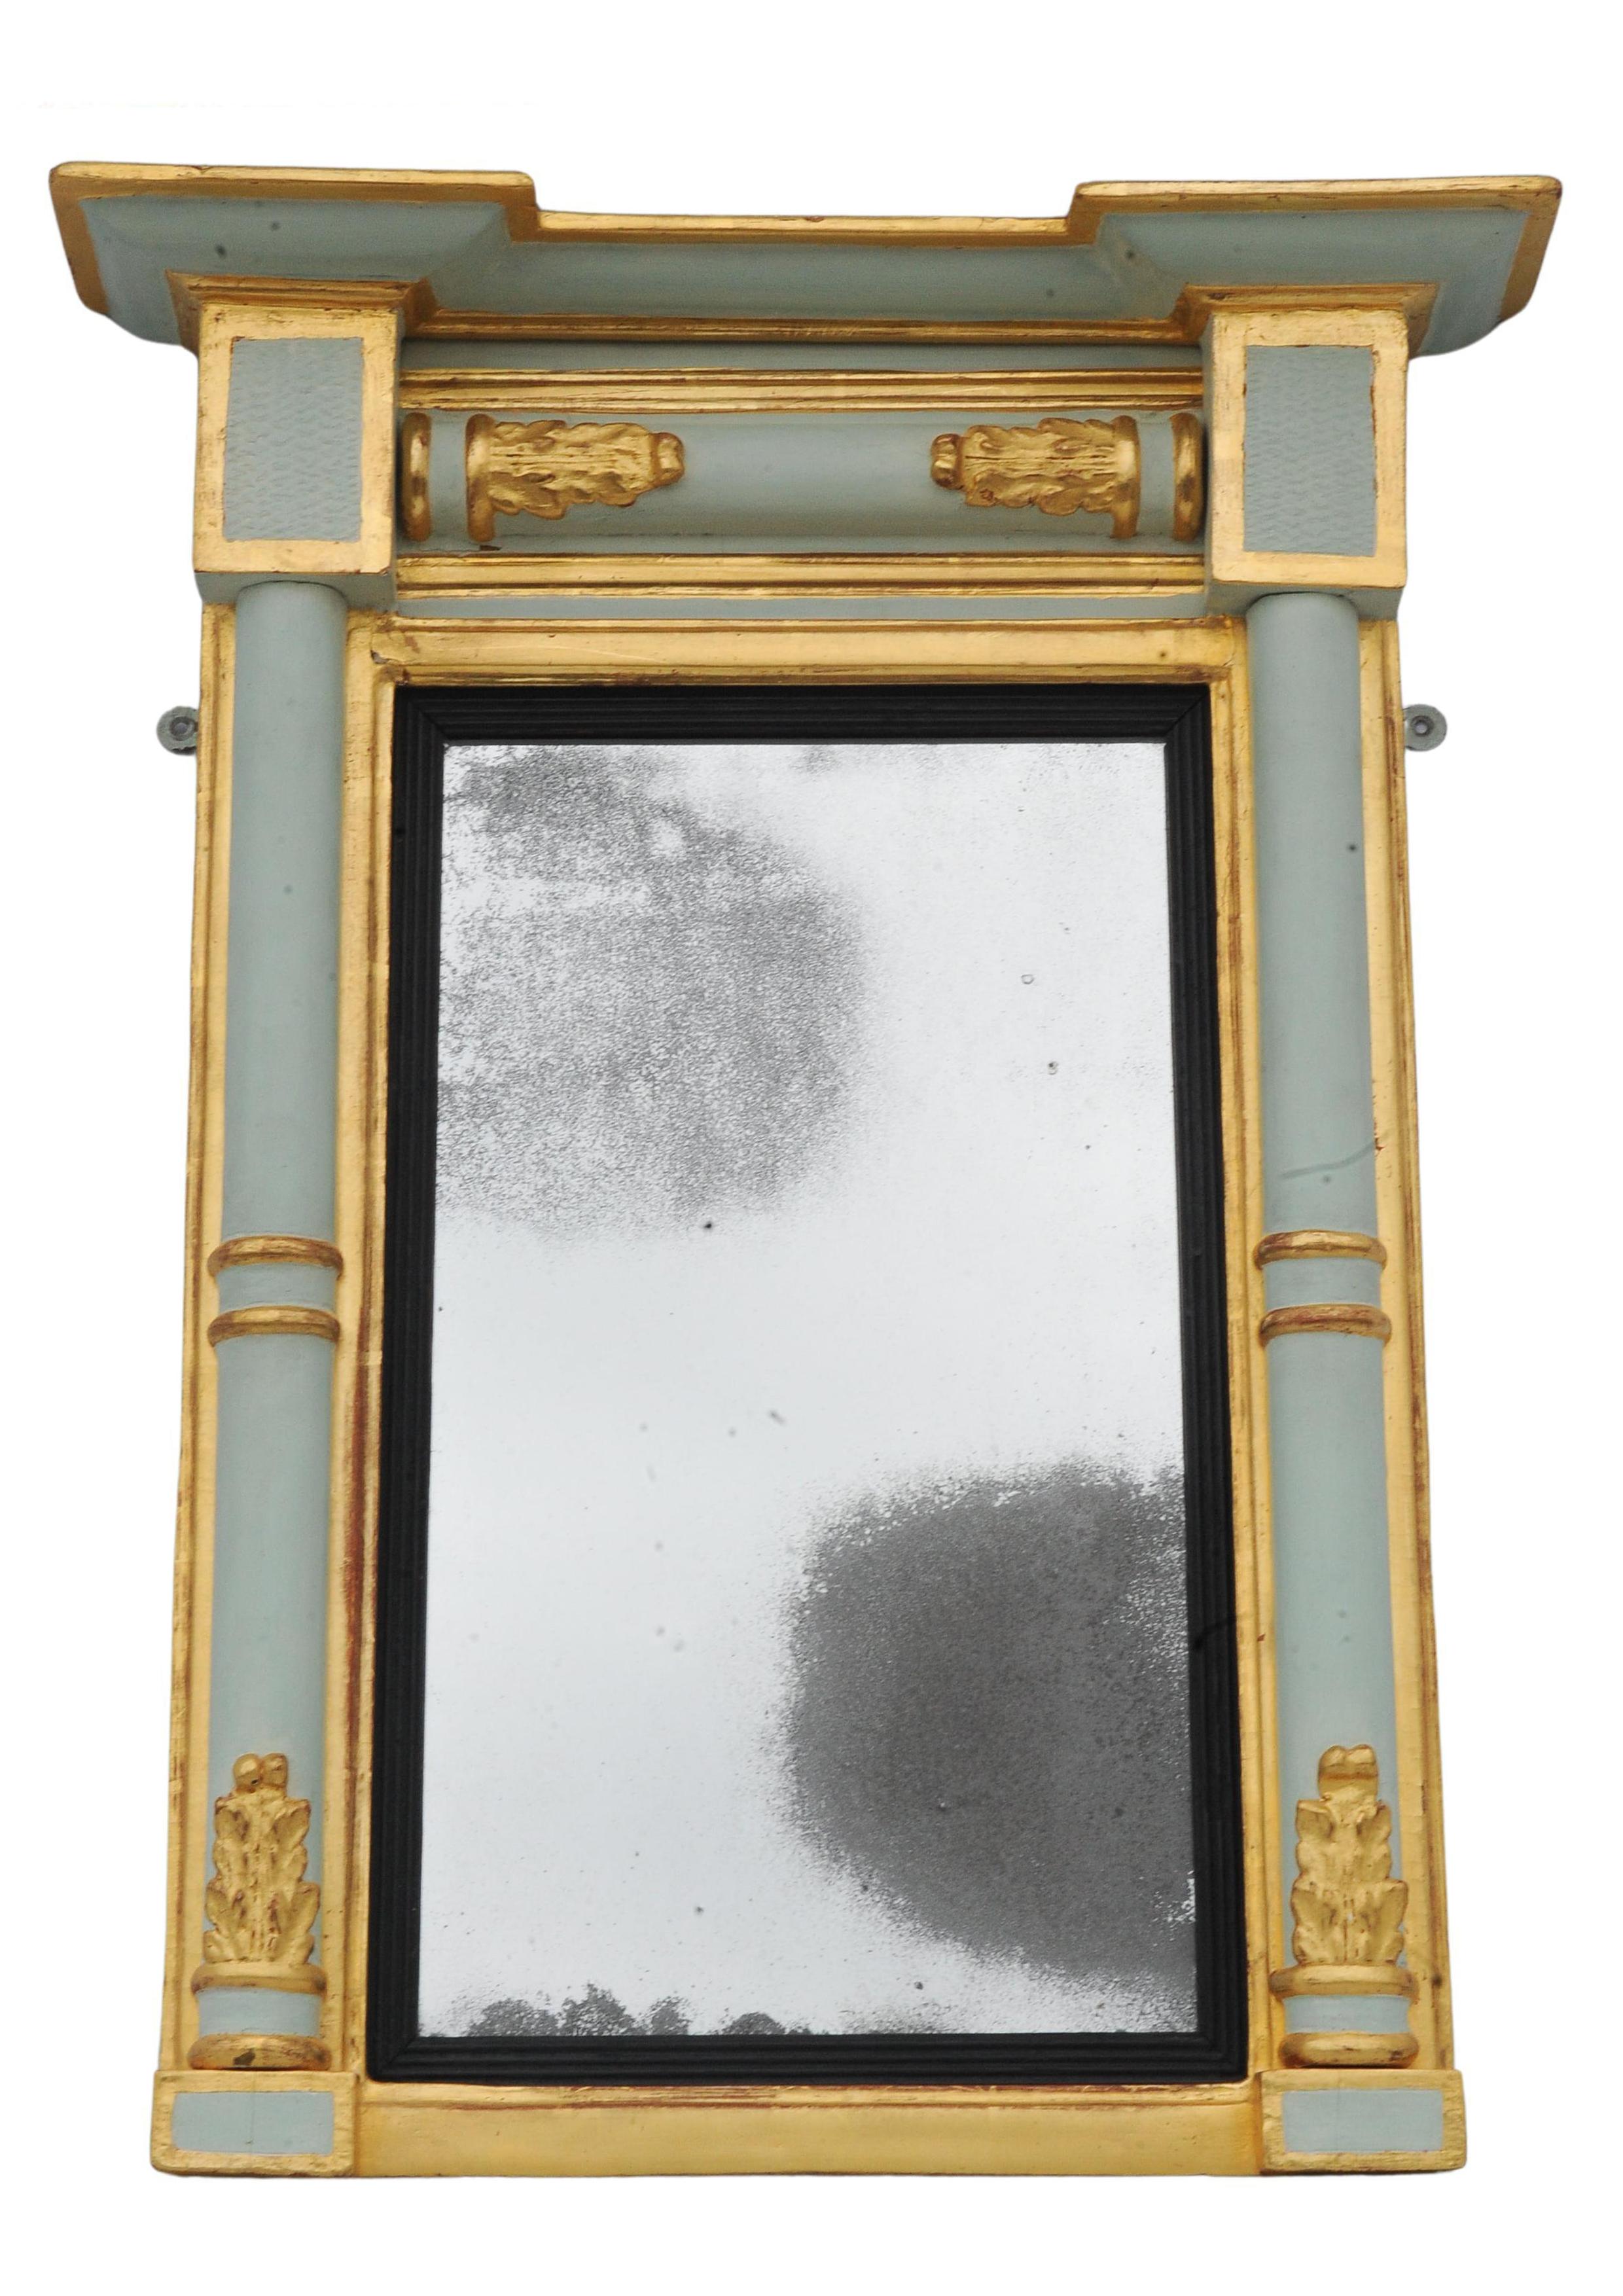 An Elegant Egyptian Revival 19th Century Pale Blue Hand-Painted and Parcel Gilt Pier Wall Mirror. 
Mirror face has heavy oxidisation.